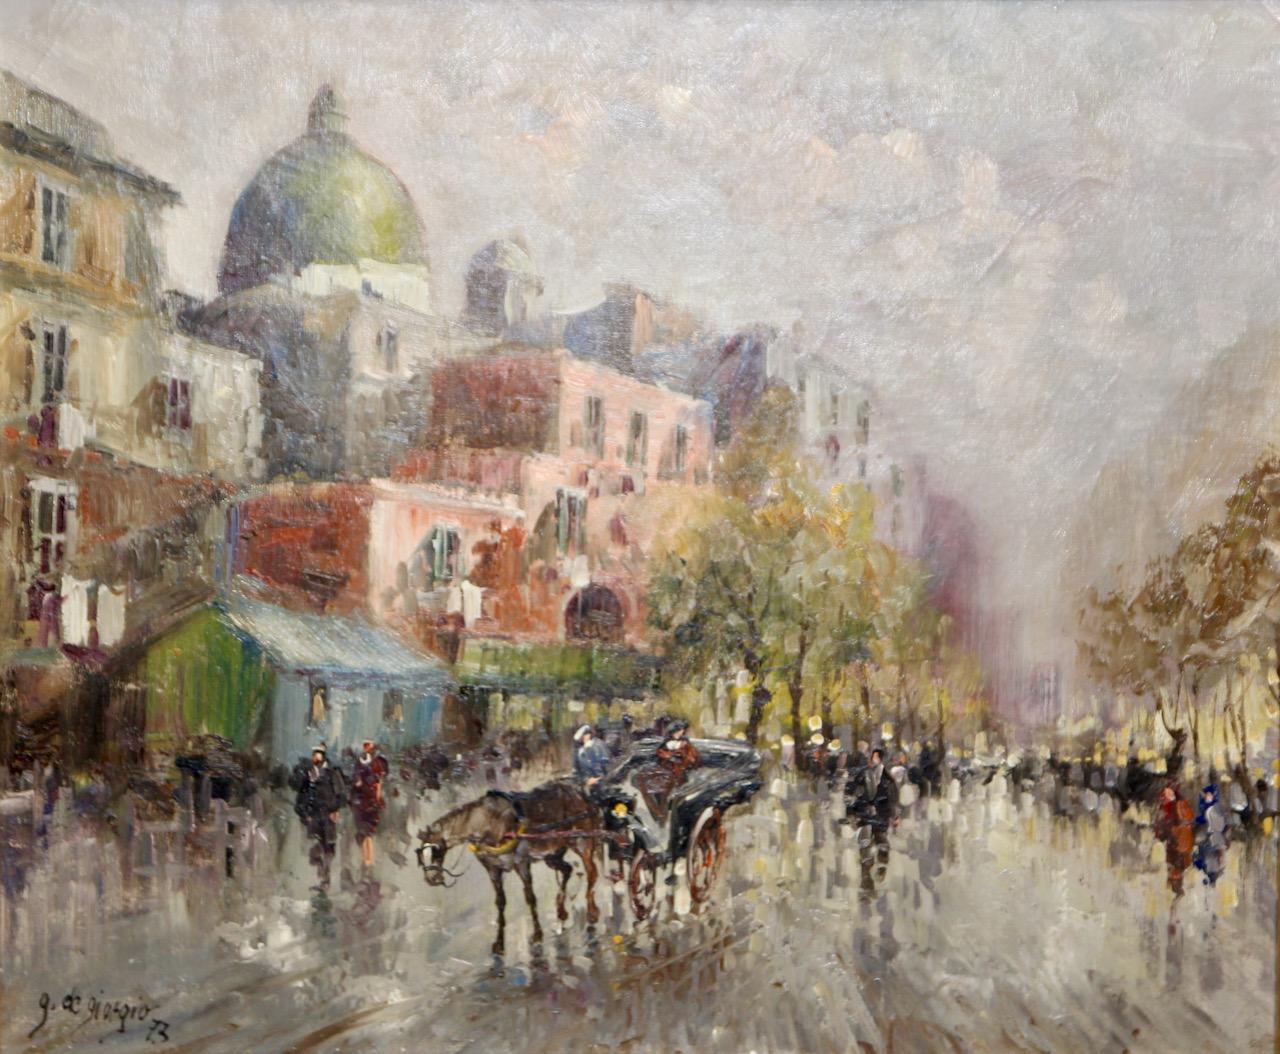 Guglielmo de Giorgio, busy street in Paris, France. Decorative oil painting.

Dimensions WITHOUT frame in cm 50 x 60
Dimensions WITH frame in cm 63.5 x 73.5

Enter the fascinating world of the late 19th century with this stunning oil painting